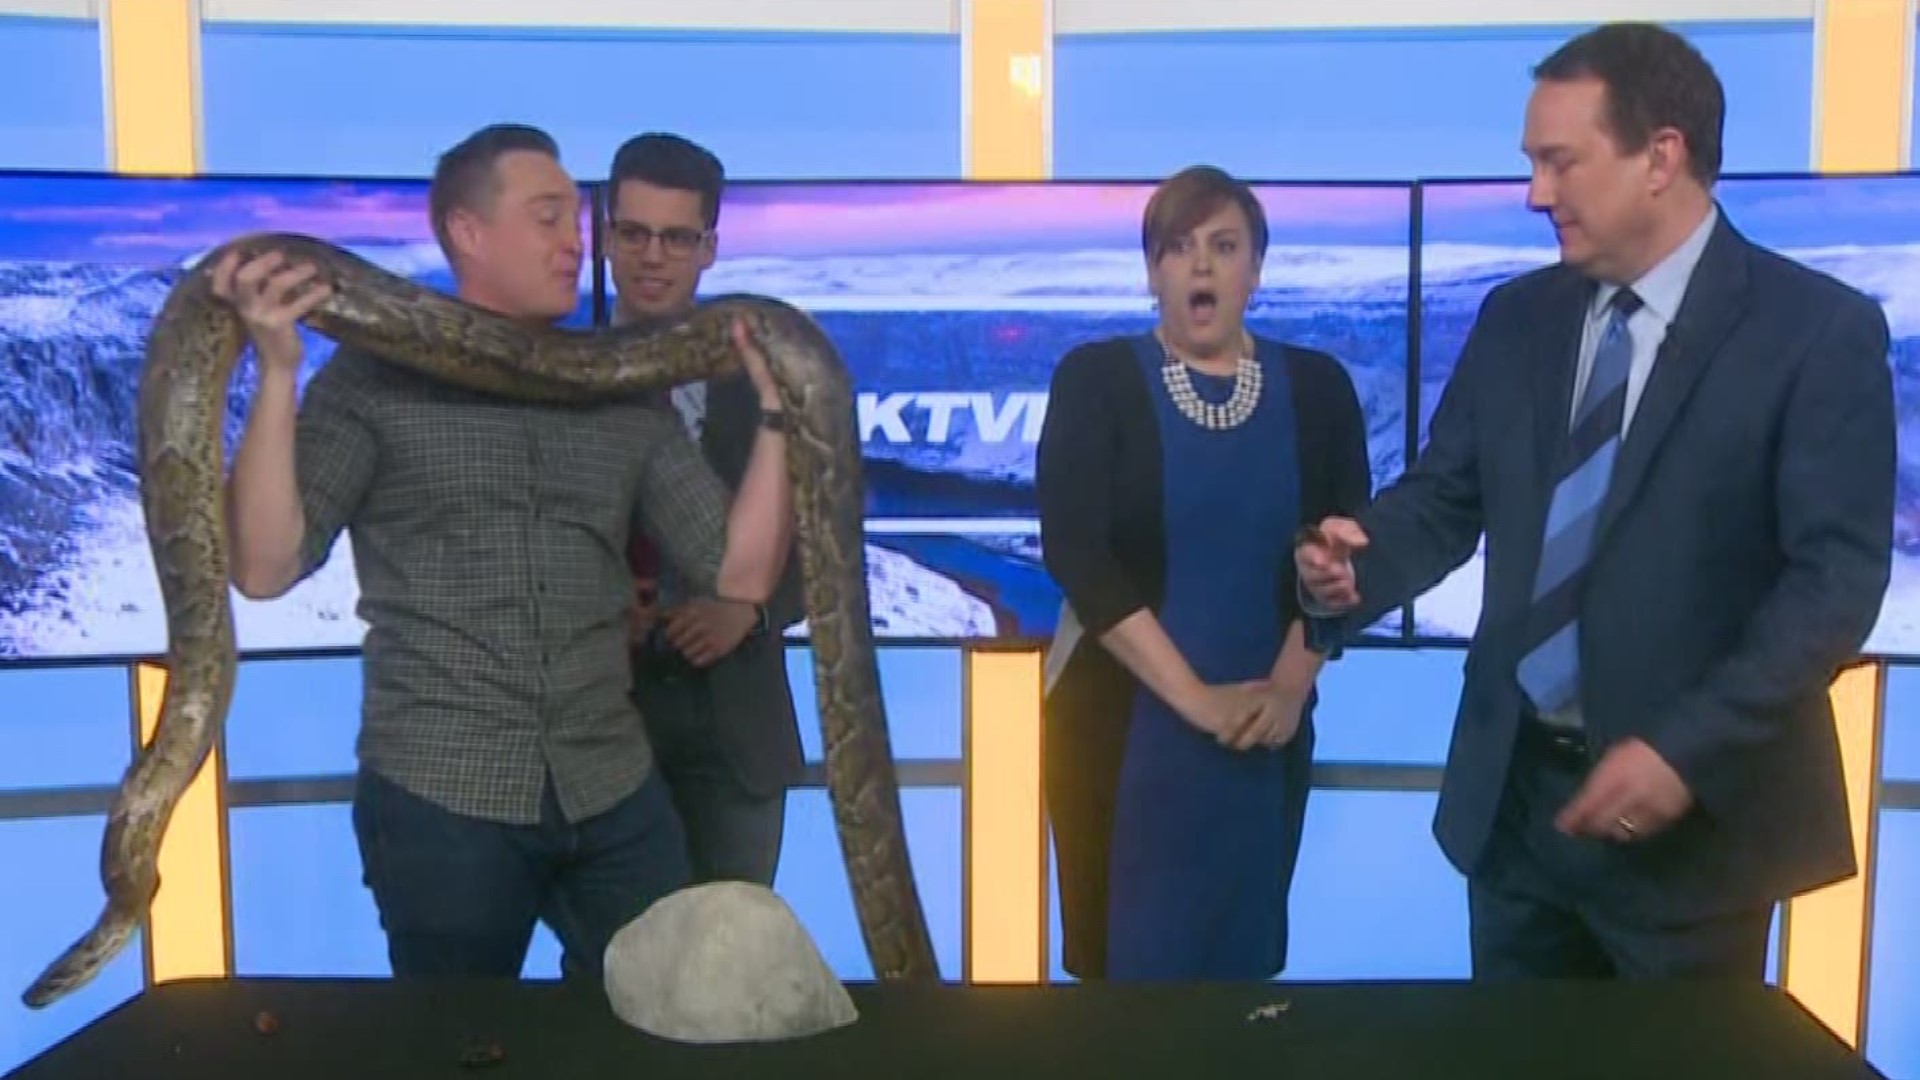 Corbin came to the KTVB studios to show off his animal friends - including a 10-foot Burmese python!